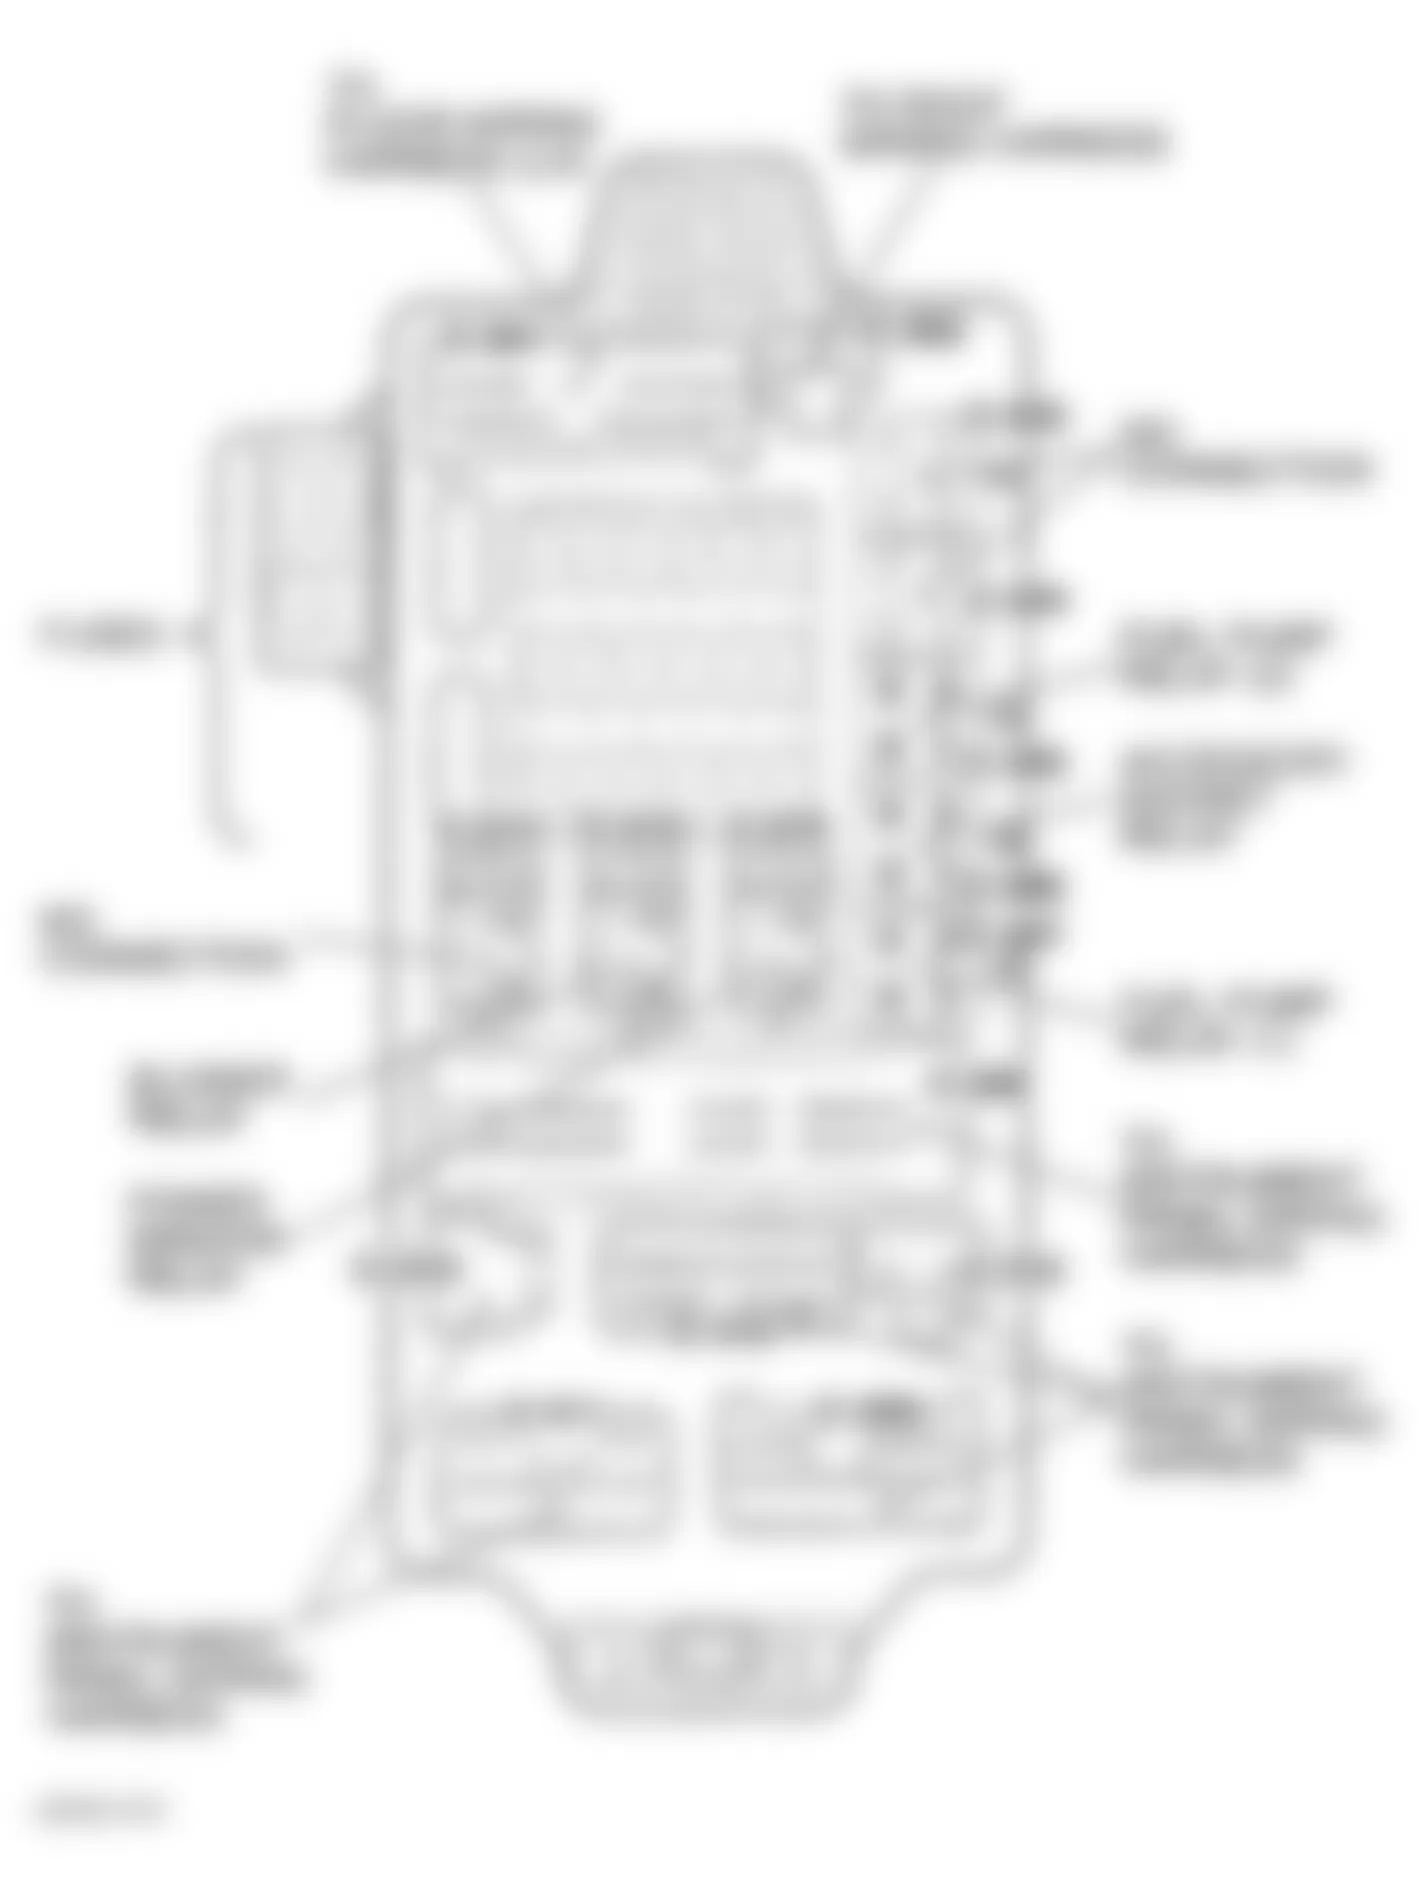 Chrysler Sebring Limited 2003 - Component Locations -  Identifying Passenger Compartment Junction Block Components